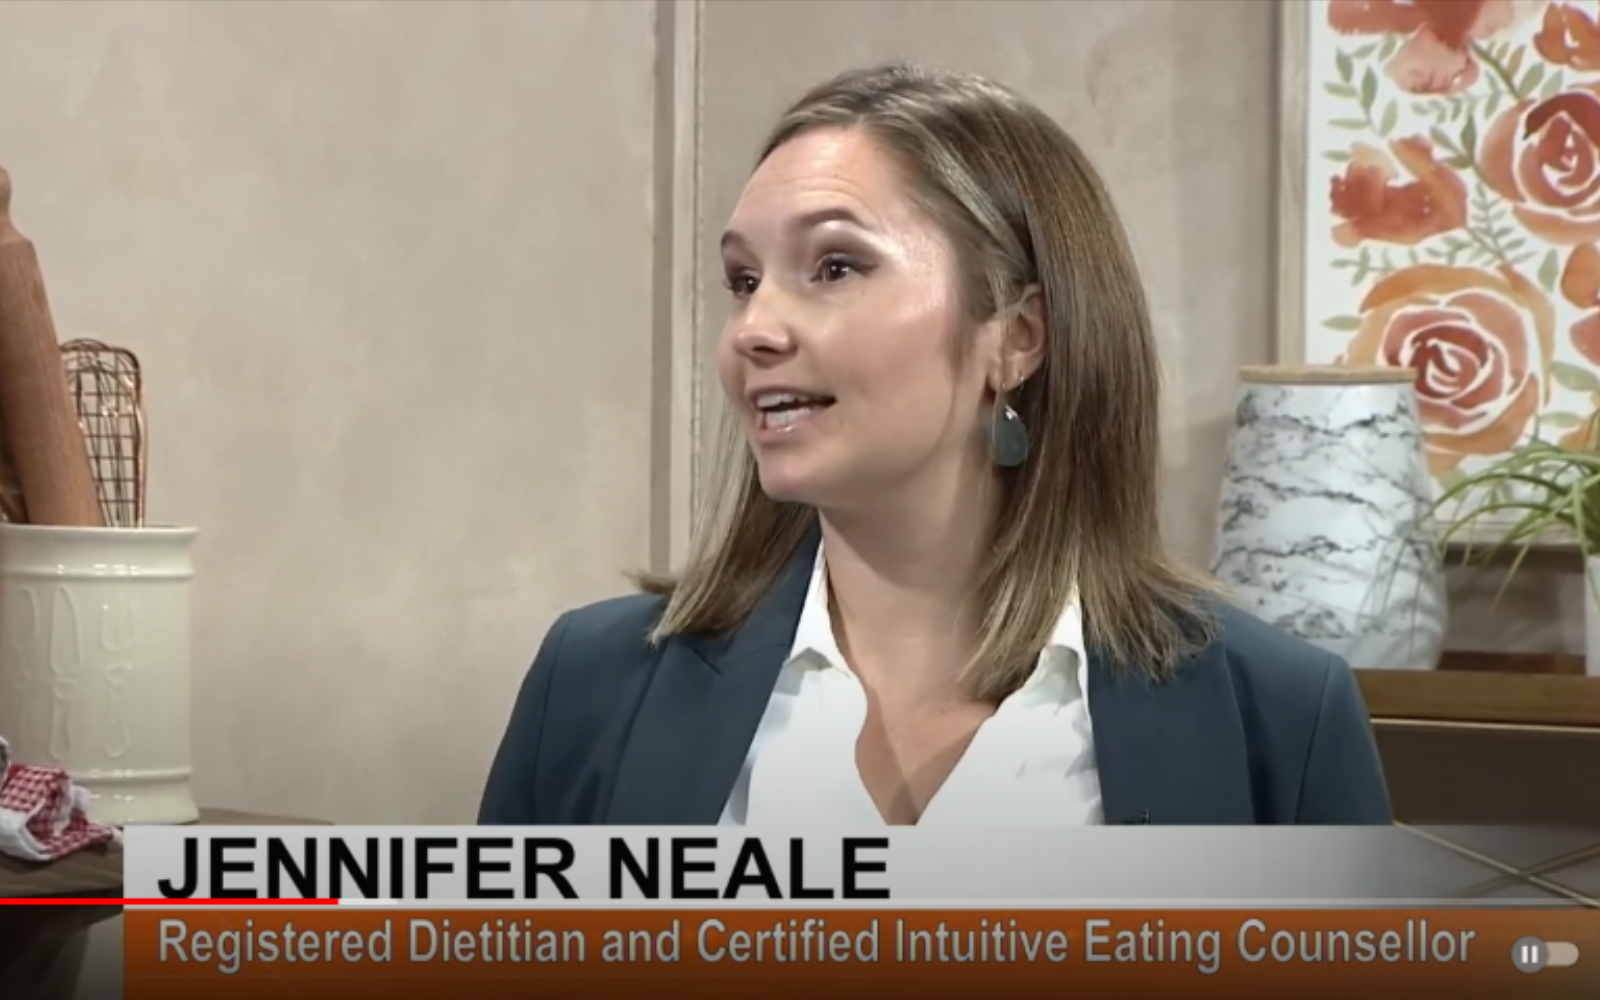 Watch Jennifer Neale on Rogers Daytime Ottawa. Jennifer Neale is a Registered Dietitian, Certified Intuitive Eating Counsellor, and owner of Nutrition IQ, a boutique Nutrition Company in Ottawa Ontario focused on Intuitive Eating and Weight-Inclusive Care